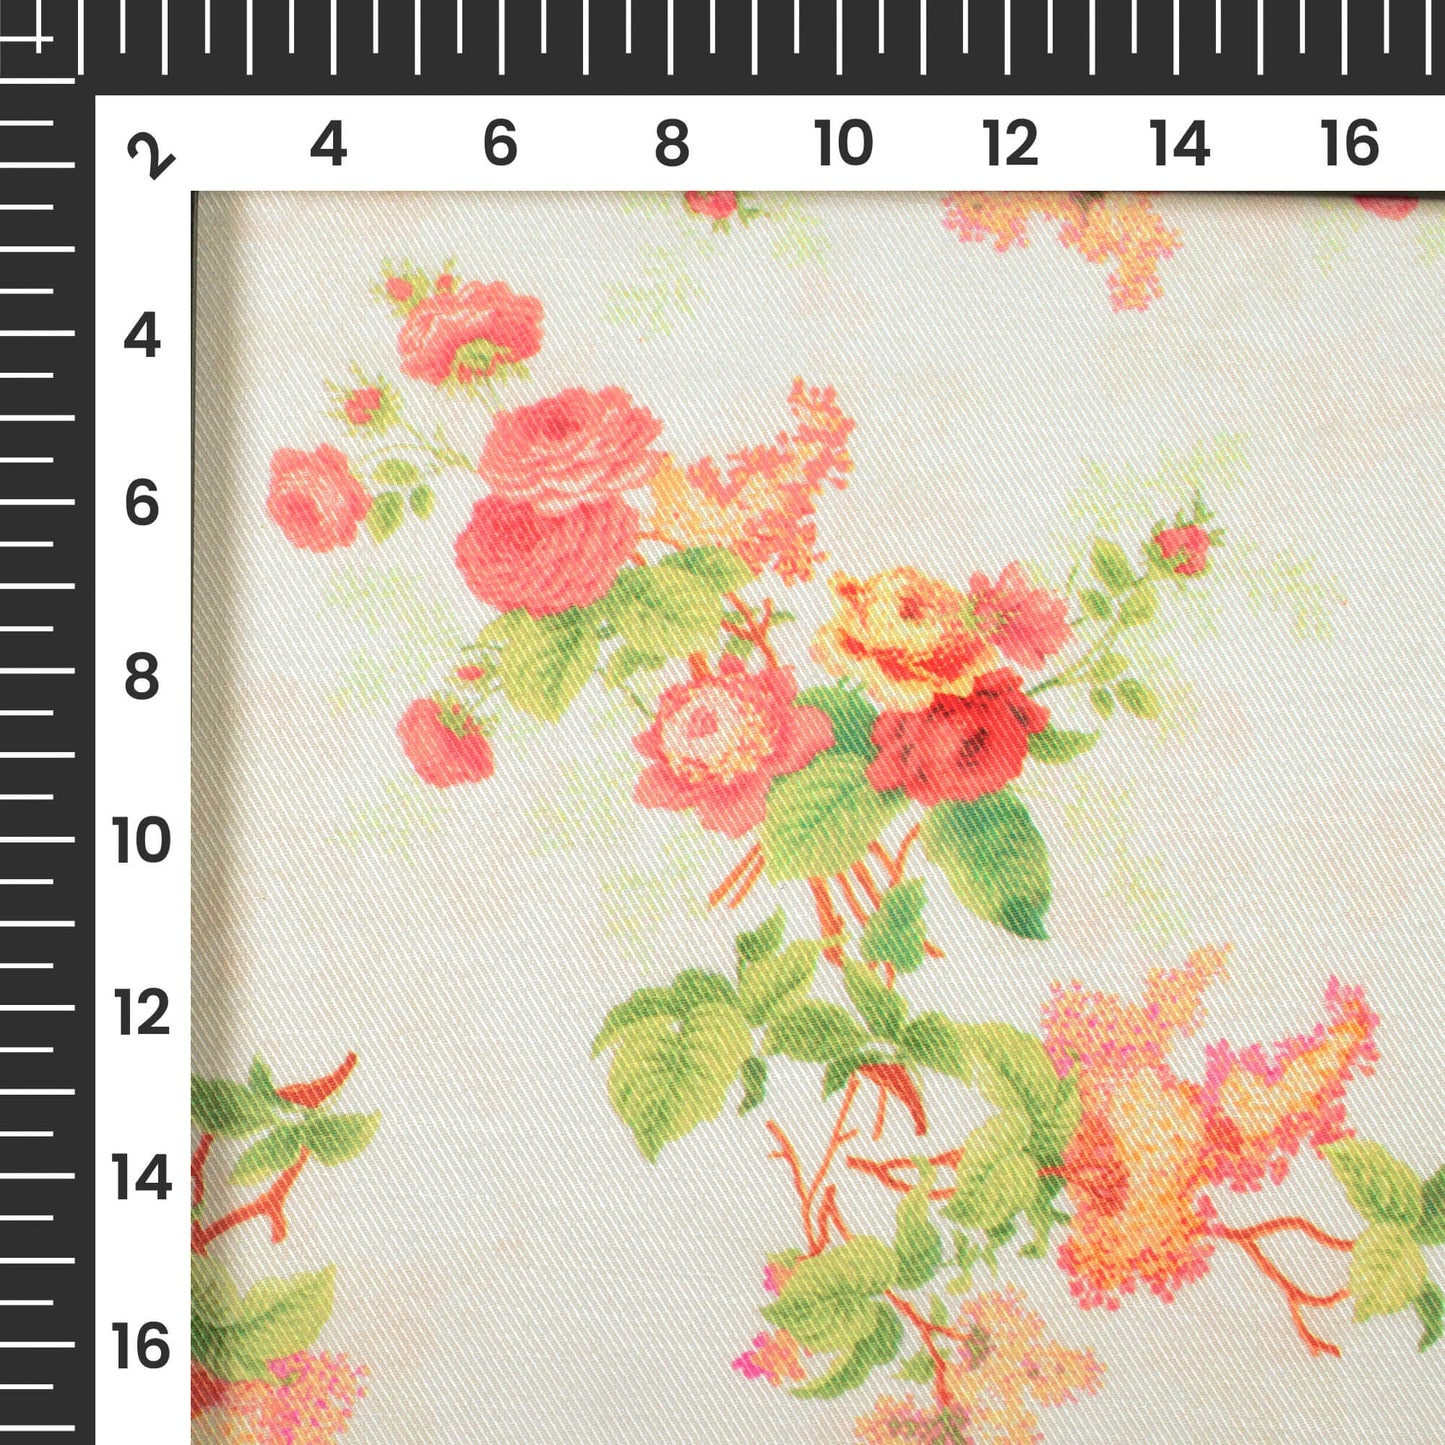 Ivory White And Pink Floral Pattern Digital Print Twill Fabric (Width 56 Inches)